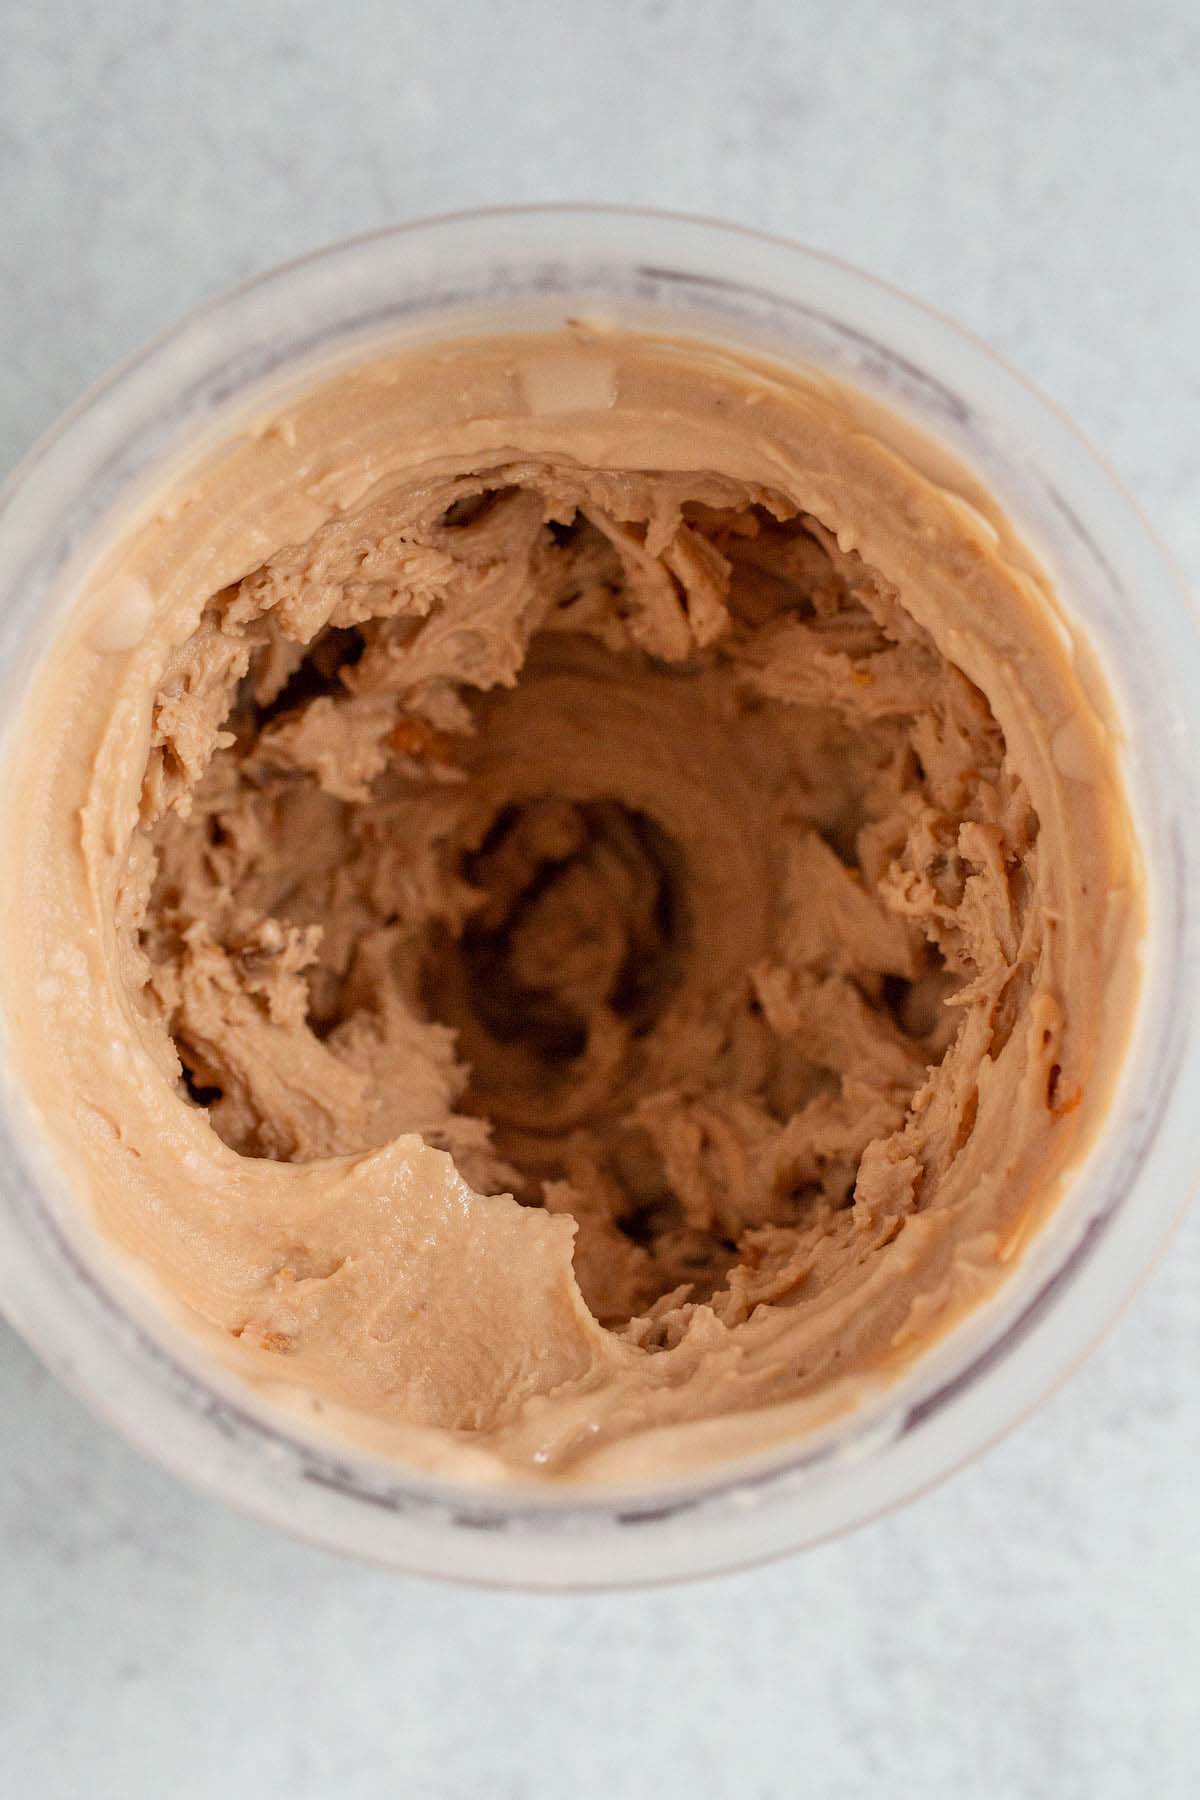 Chocolate peanut butter creami in Creami container